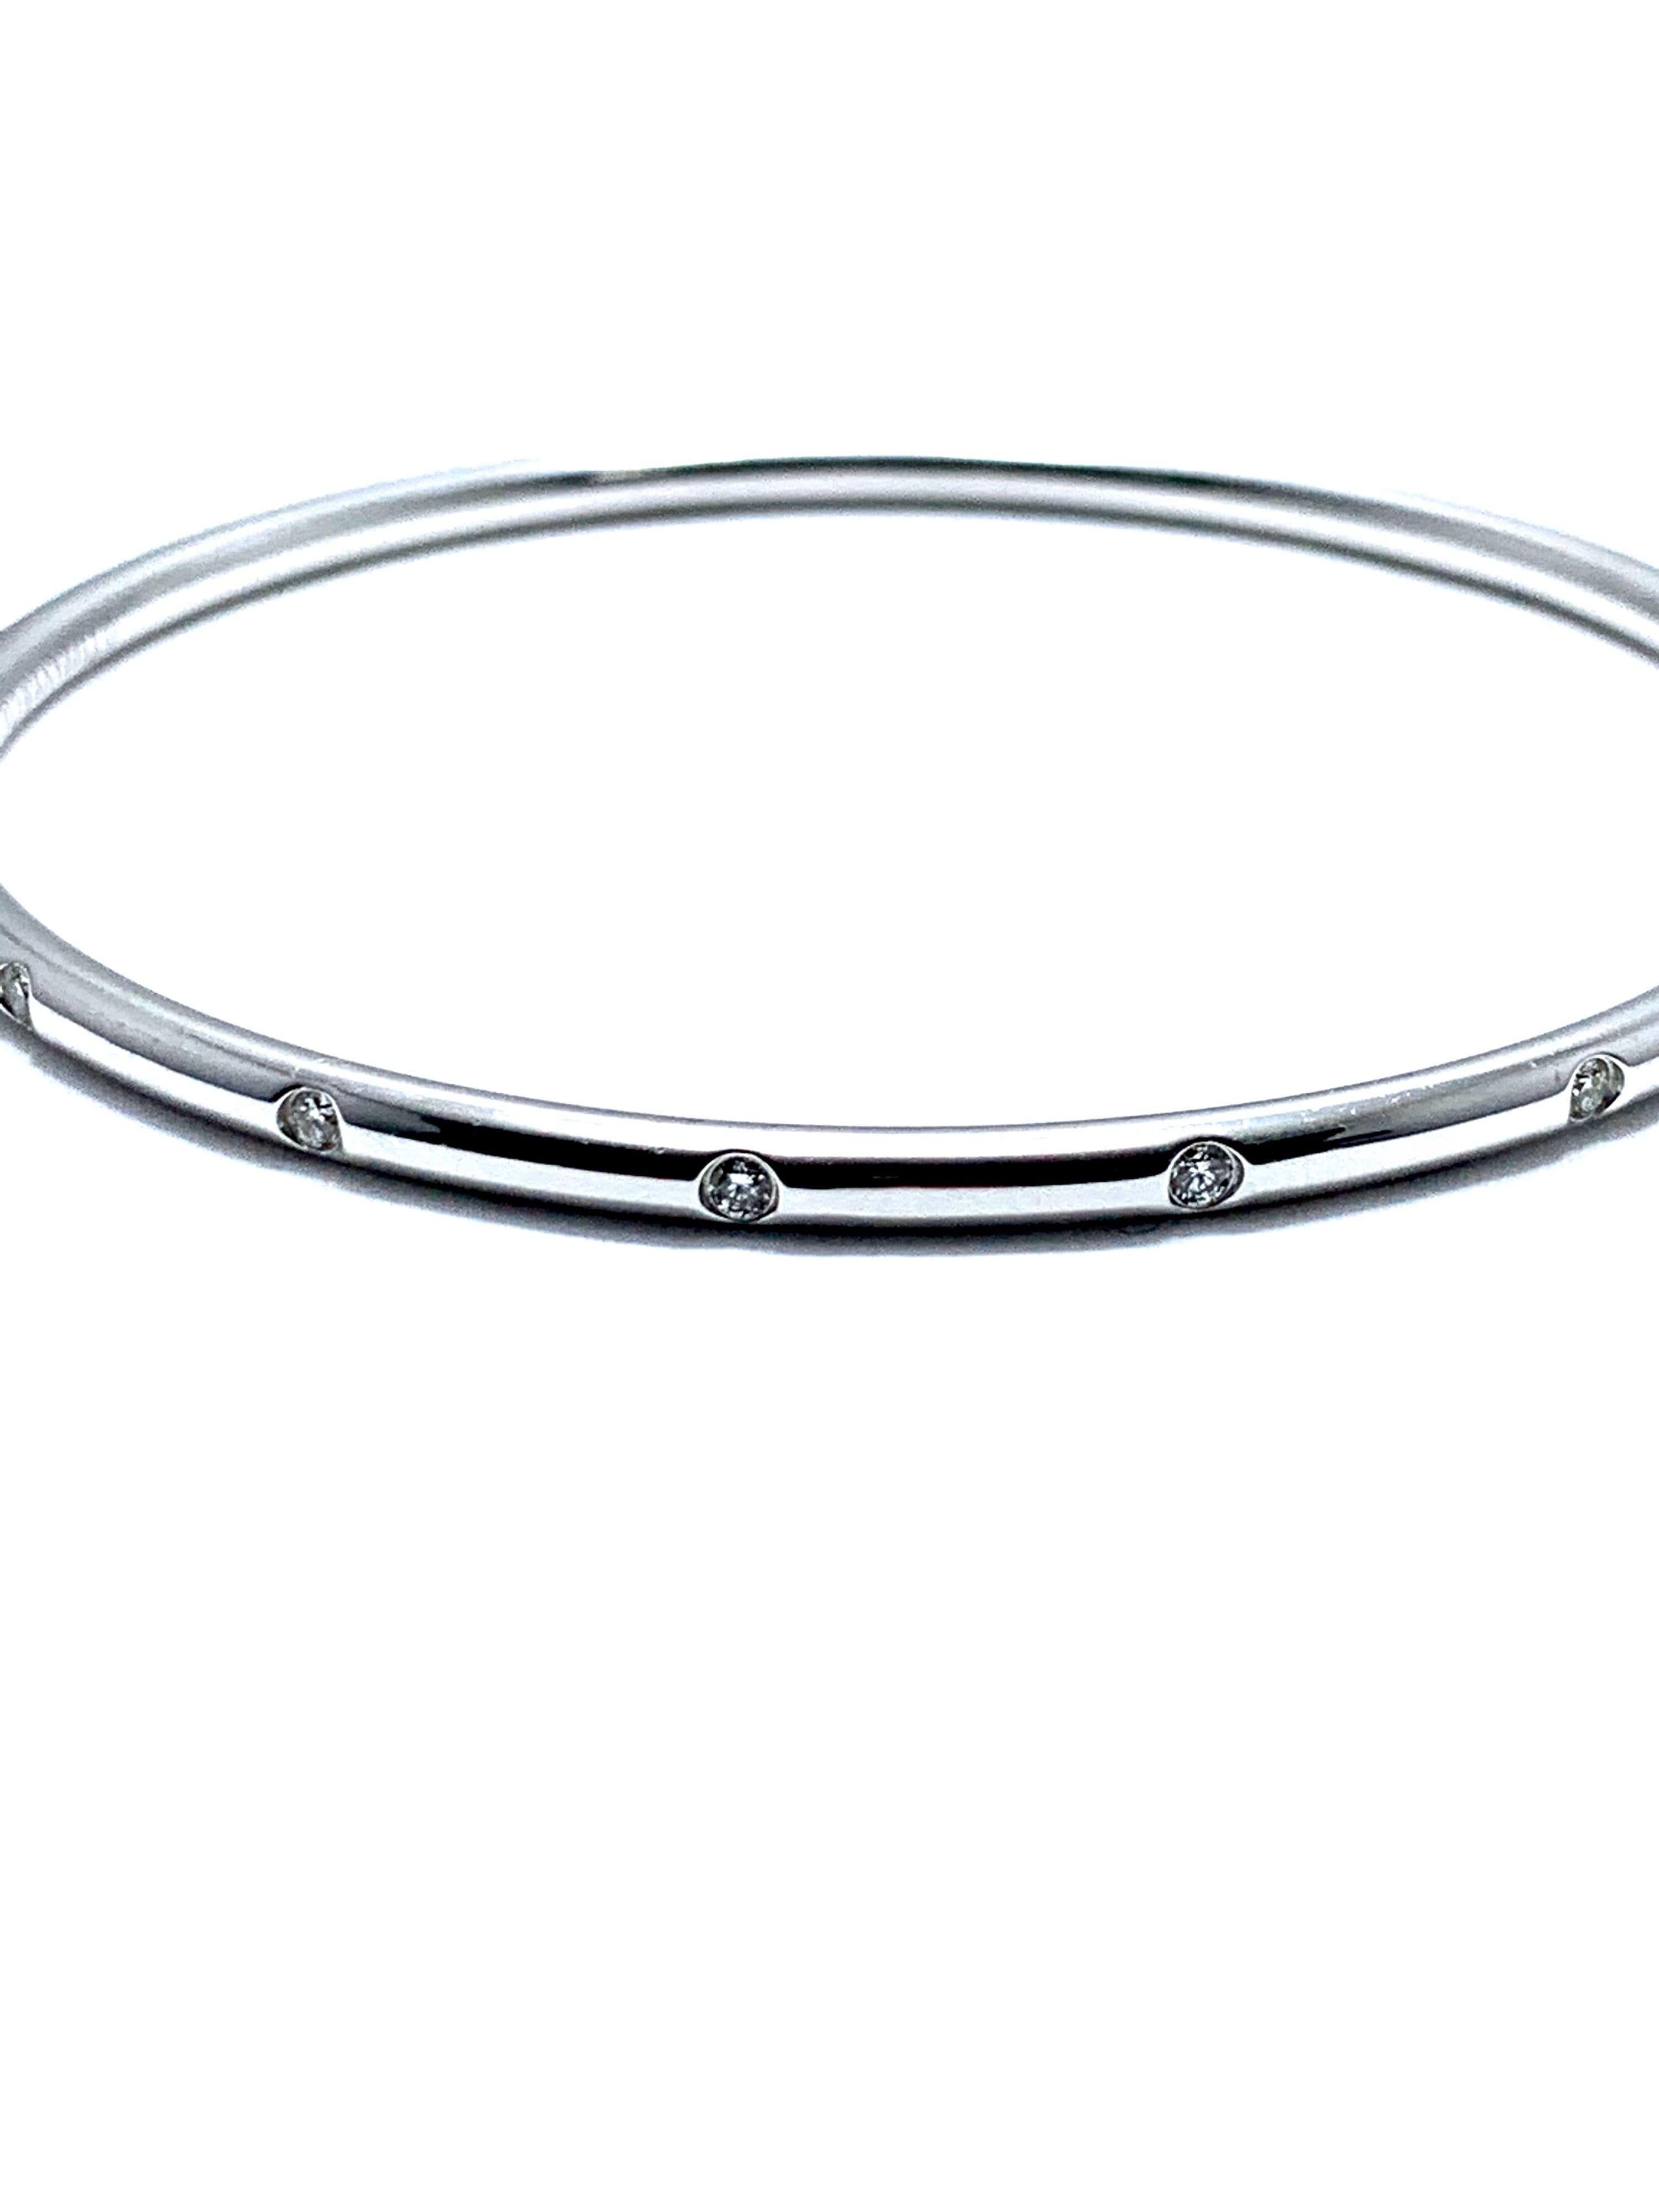 Simple and modern, the designed of the Etoile collection are elegantly punctuated with round brilliant Diamonds.  This beautiful bangle is a timeless touch to any wardrobe.  There are a total of 16 round brilliant Diamonds with a total weight of